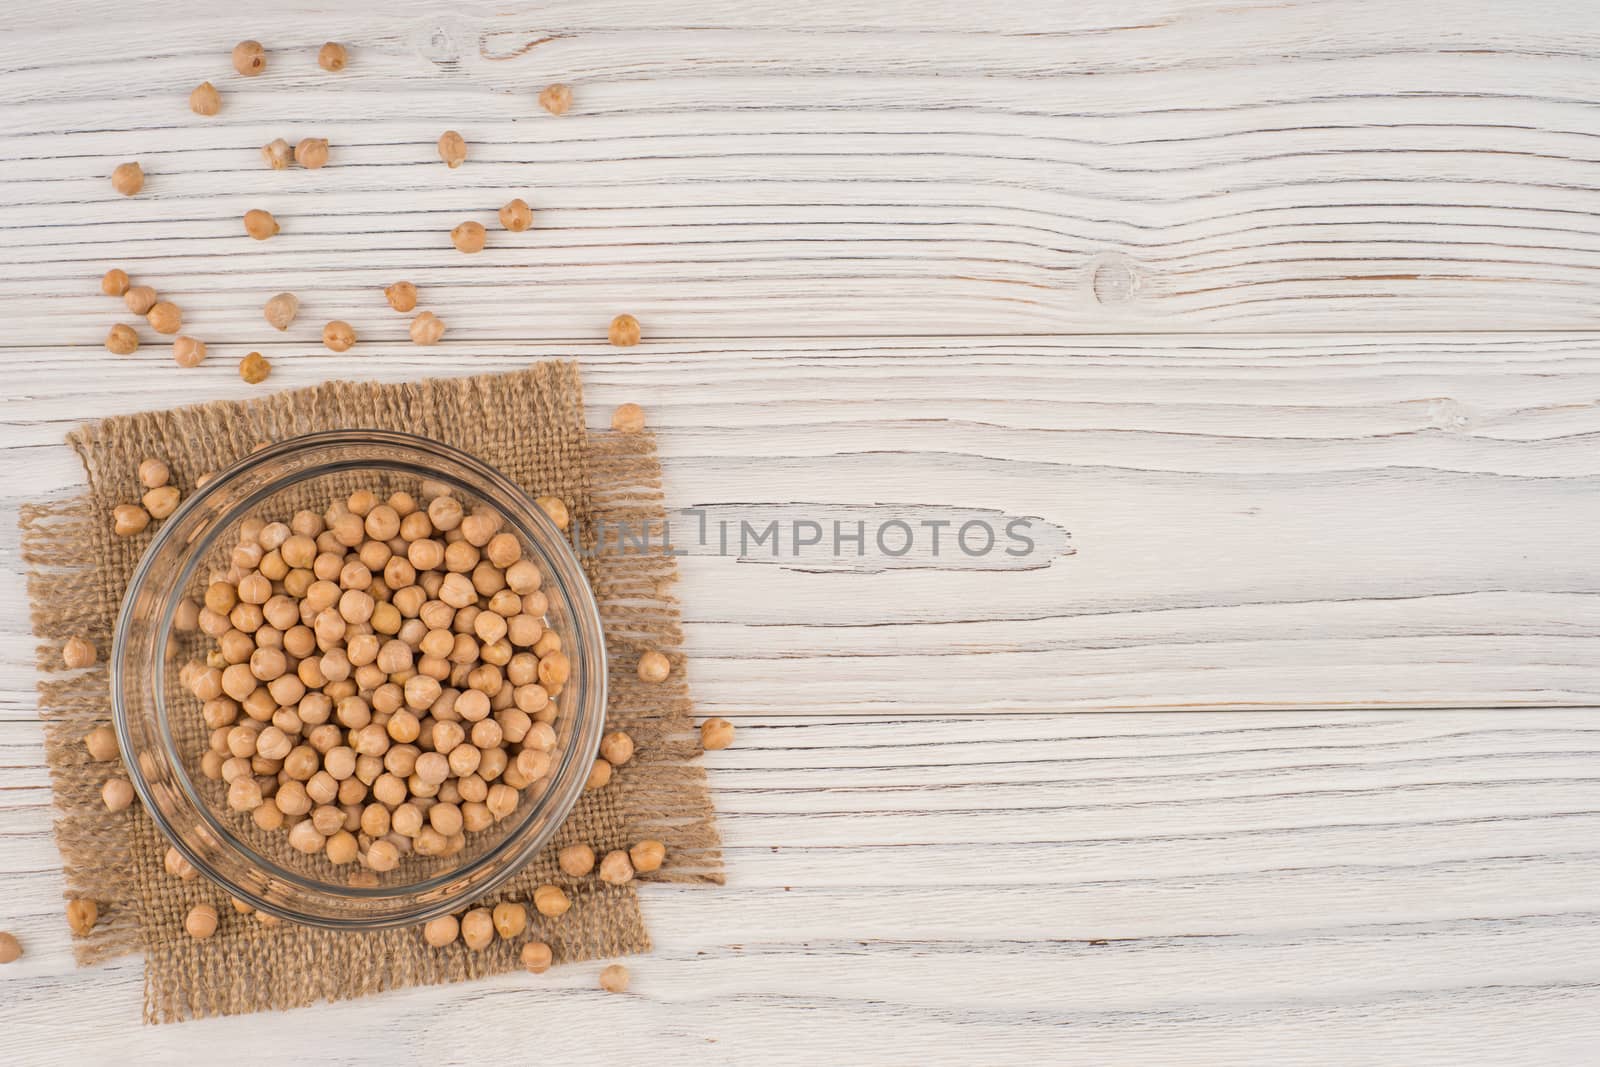 Chickpeas in a glass bowl on the old wooden table. by DGolbay